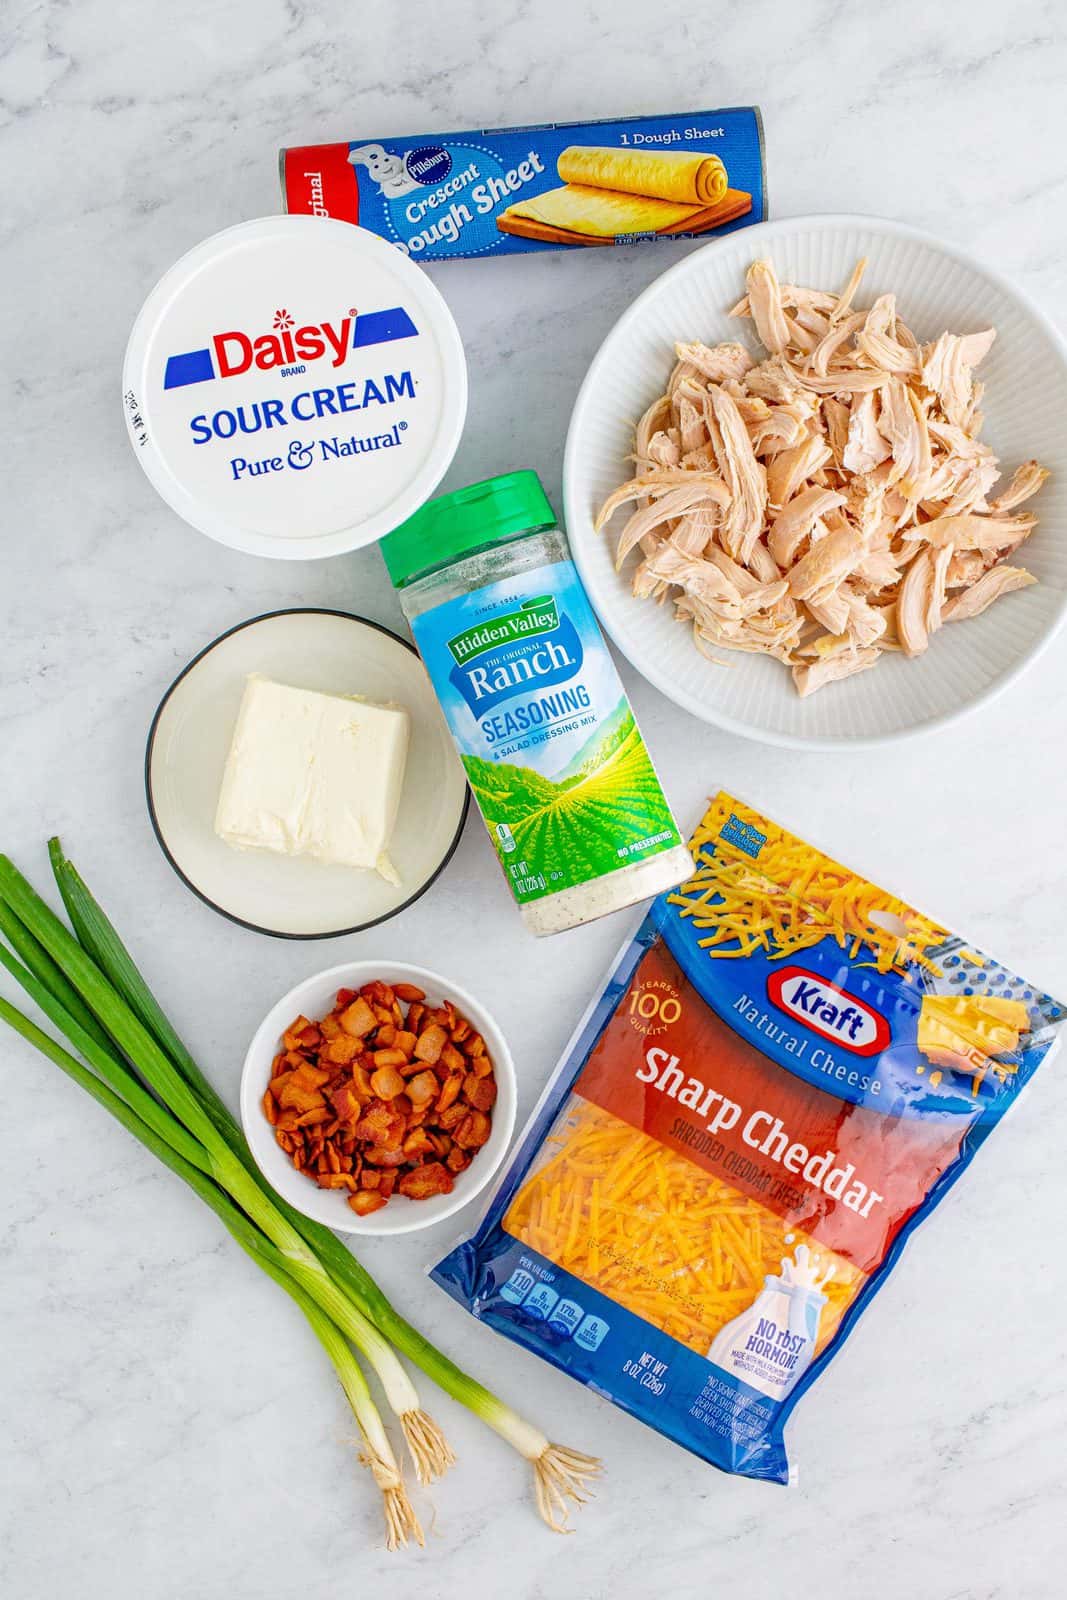 Ingredients needed: cream cheese, sour cream, dried ranch seasoning, cooked chicken, shredded cheddar cheese, bacon, scallion, crescent dough sheet and ranch dressing.